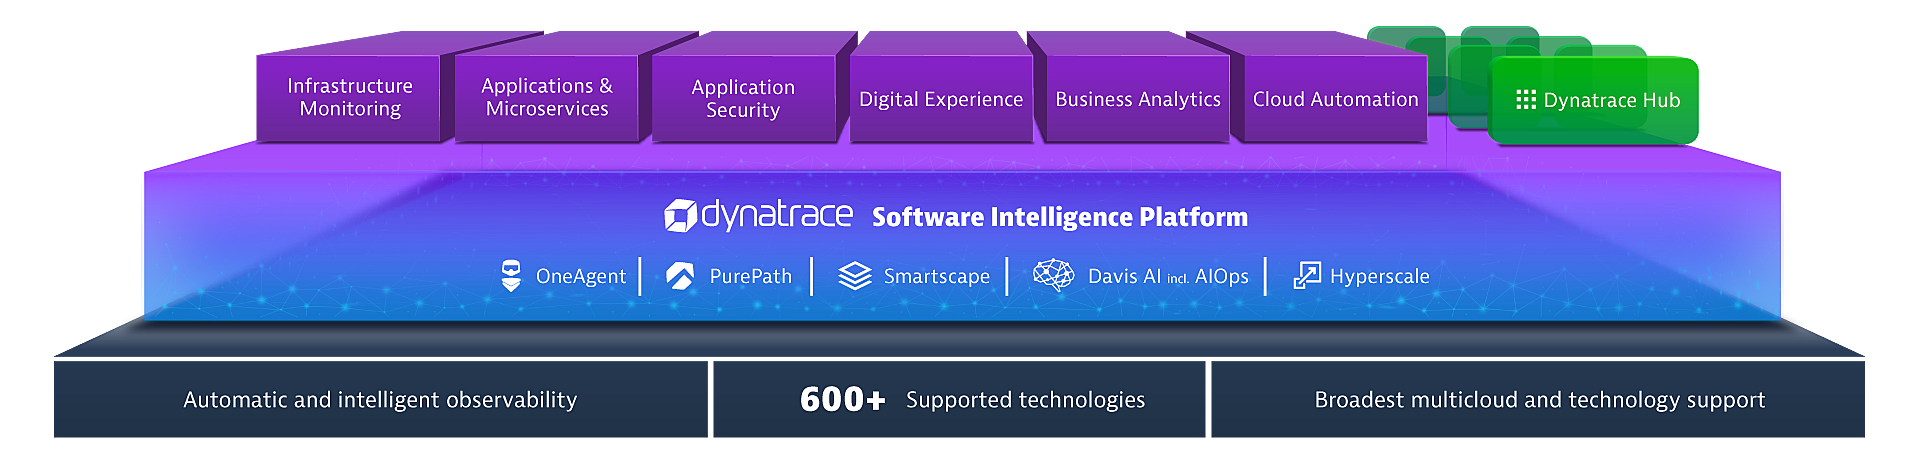 Plataforma all-in-one Dynatrace 2200 00a4216720